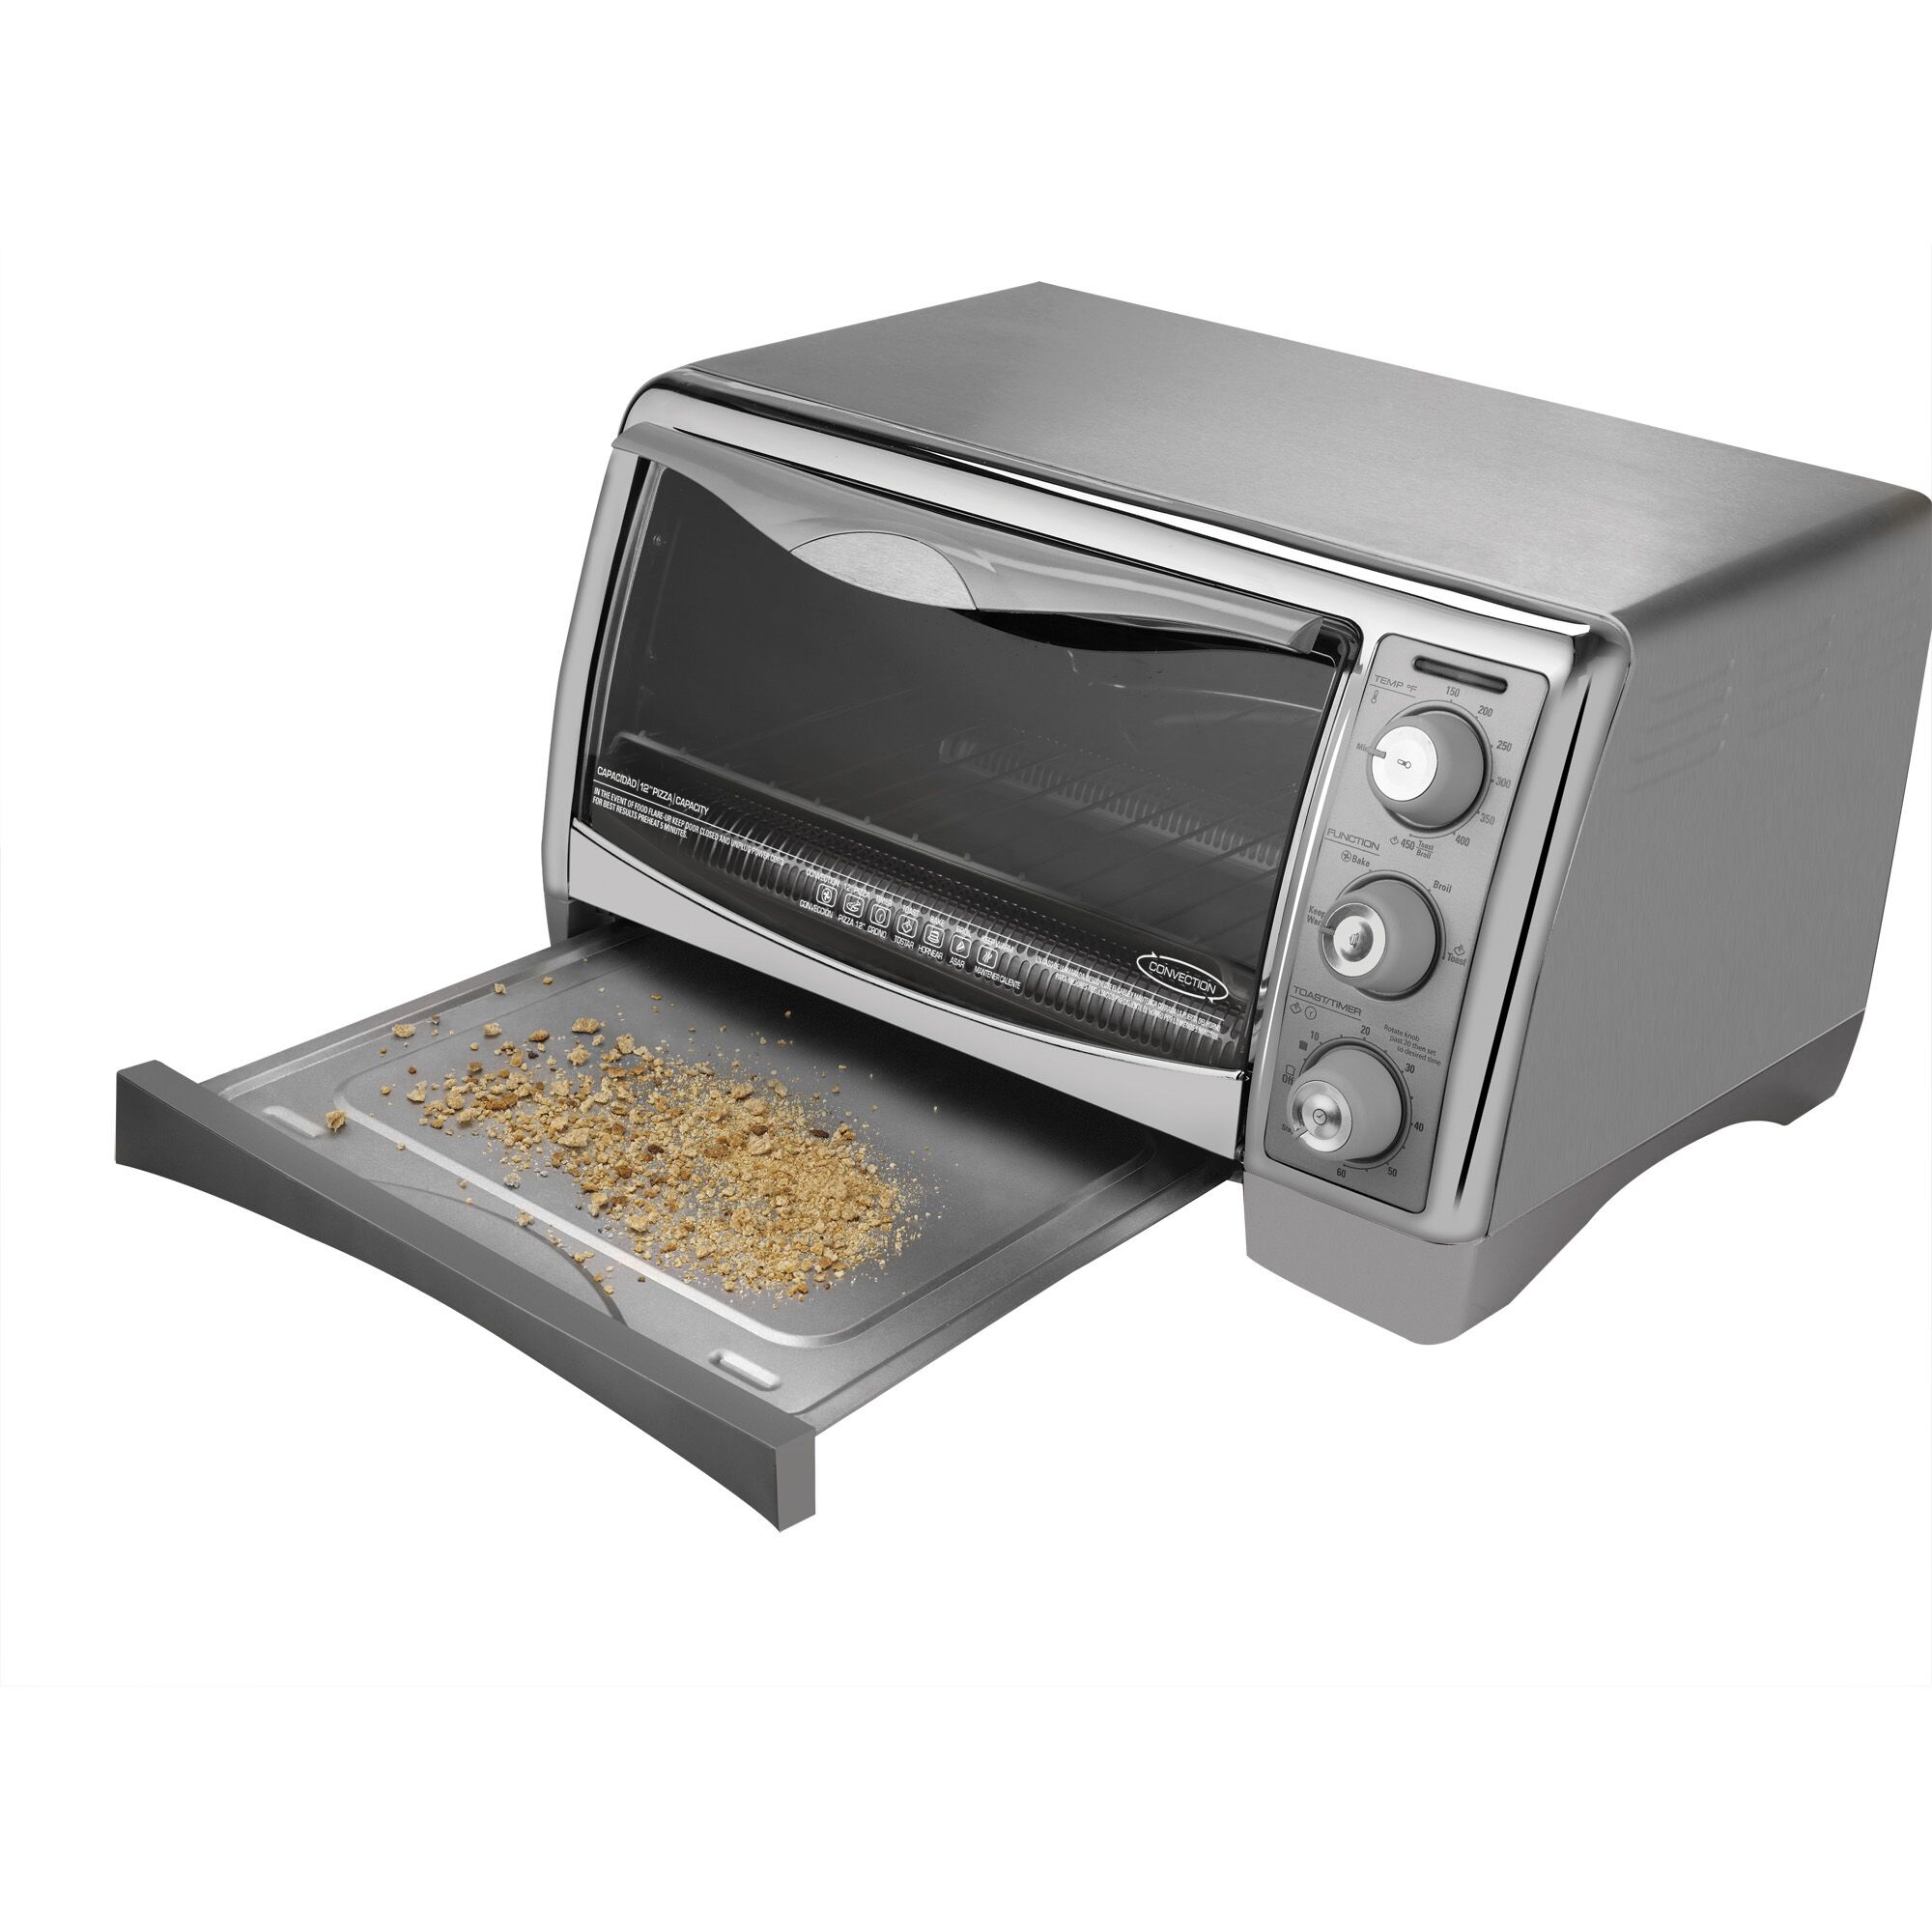 6 Slice Countertop Convection Toaster Oven.